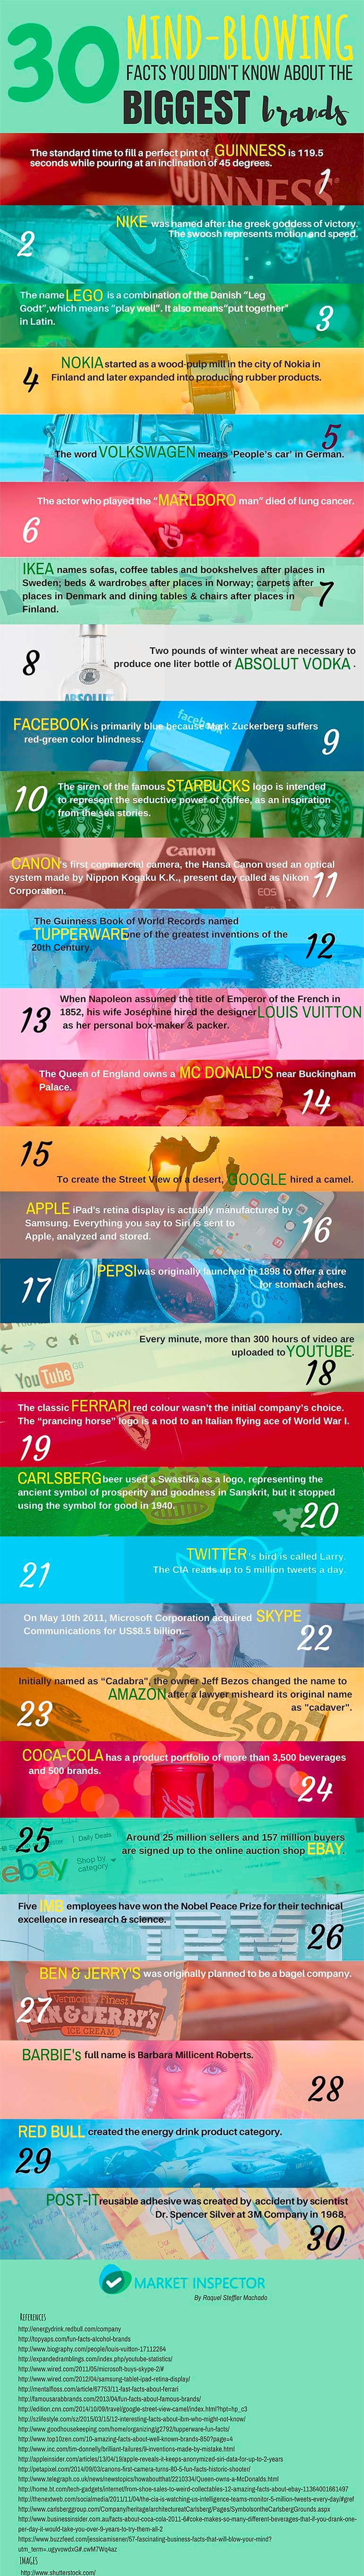 30 Mind-Blowing Fact About Brands